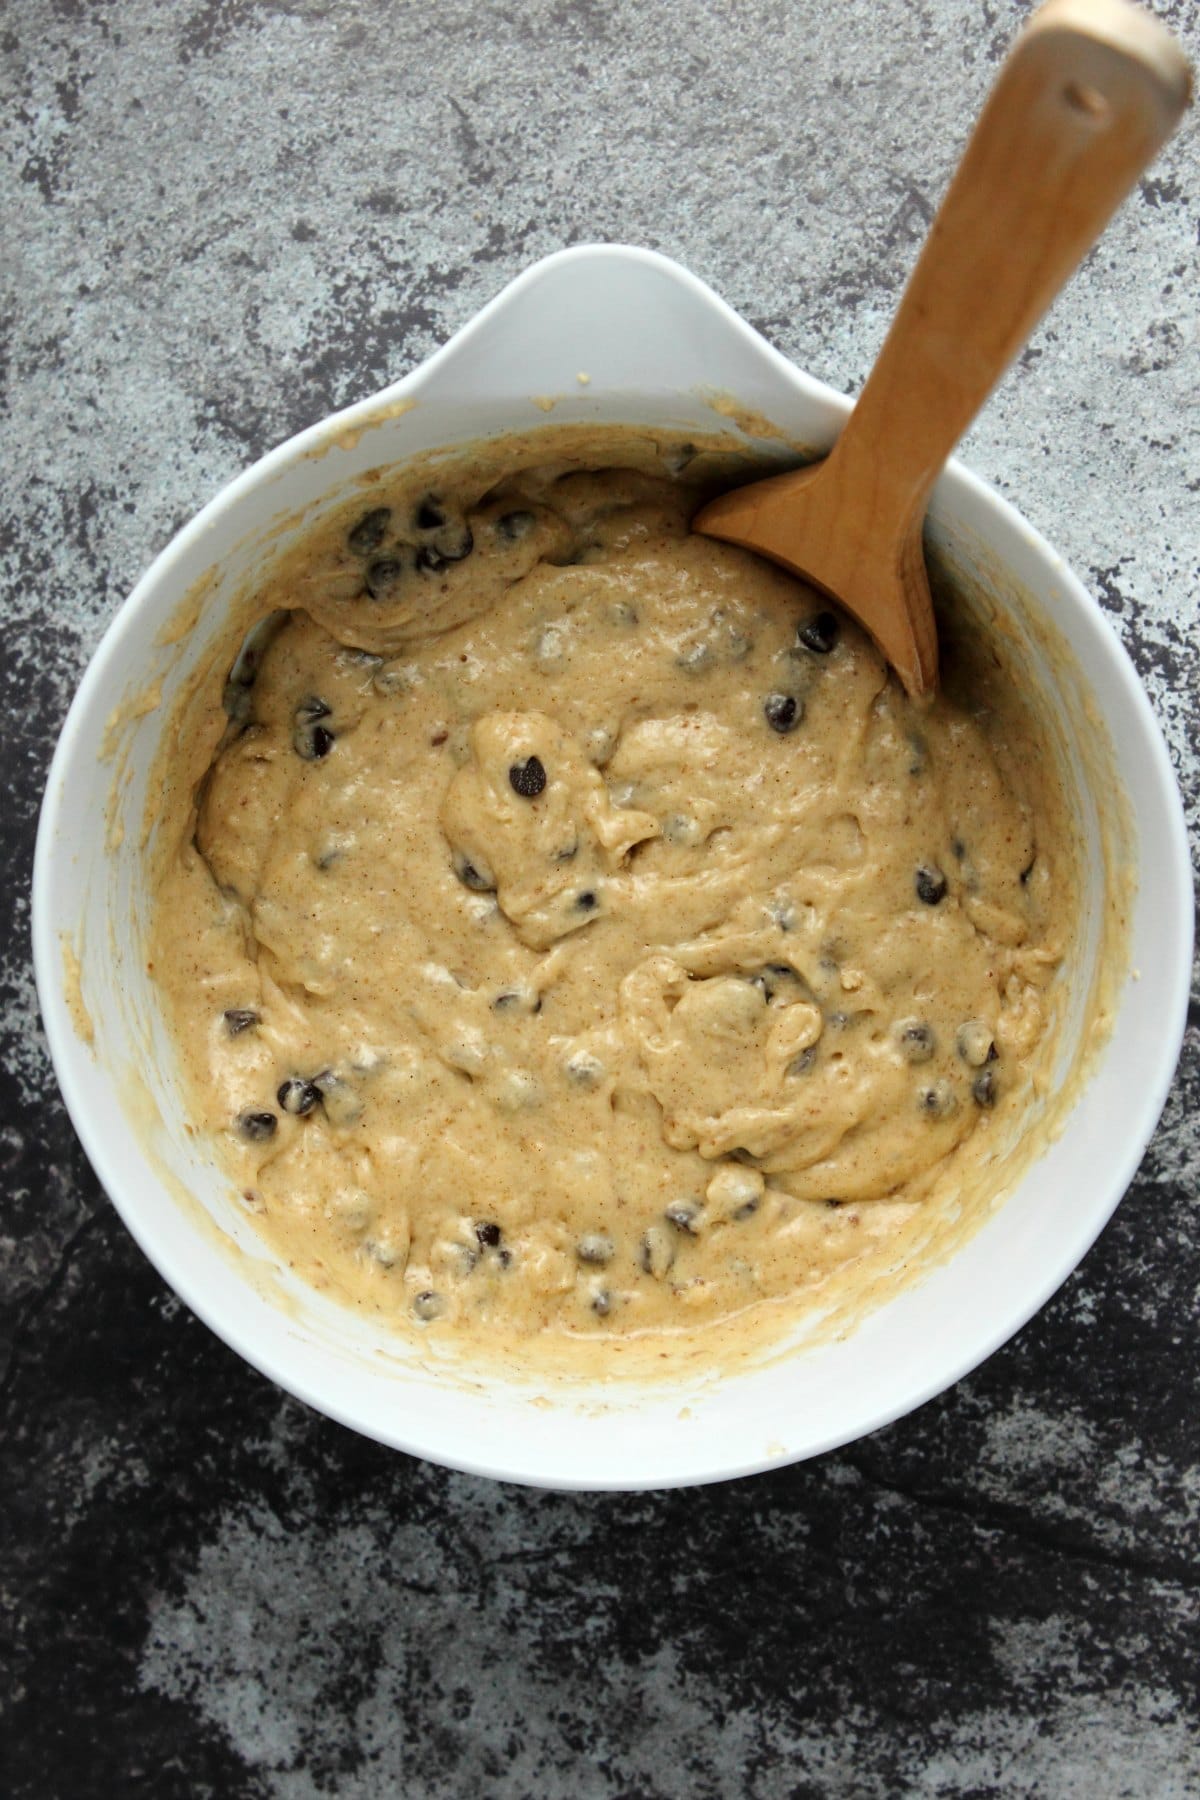 Batter for chocolate chip banana bread in a mixing bowl with a wooden spoon.